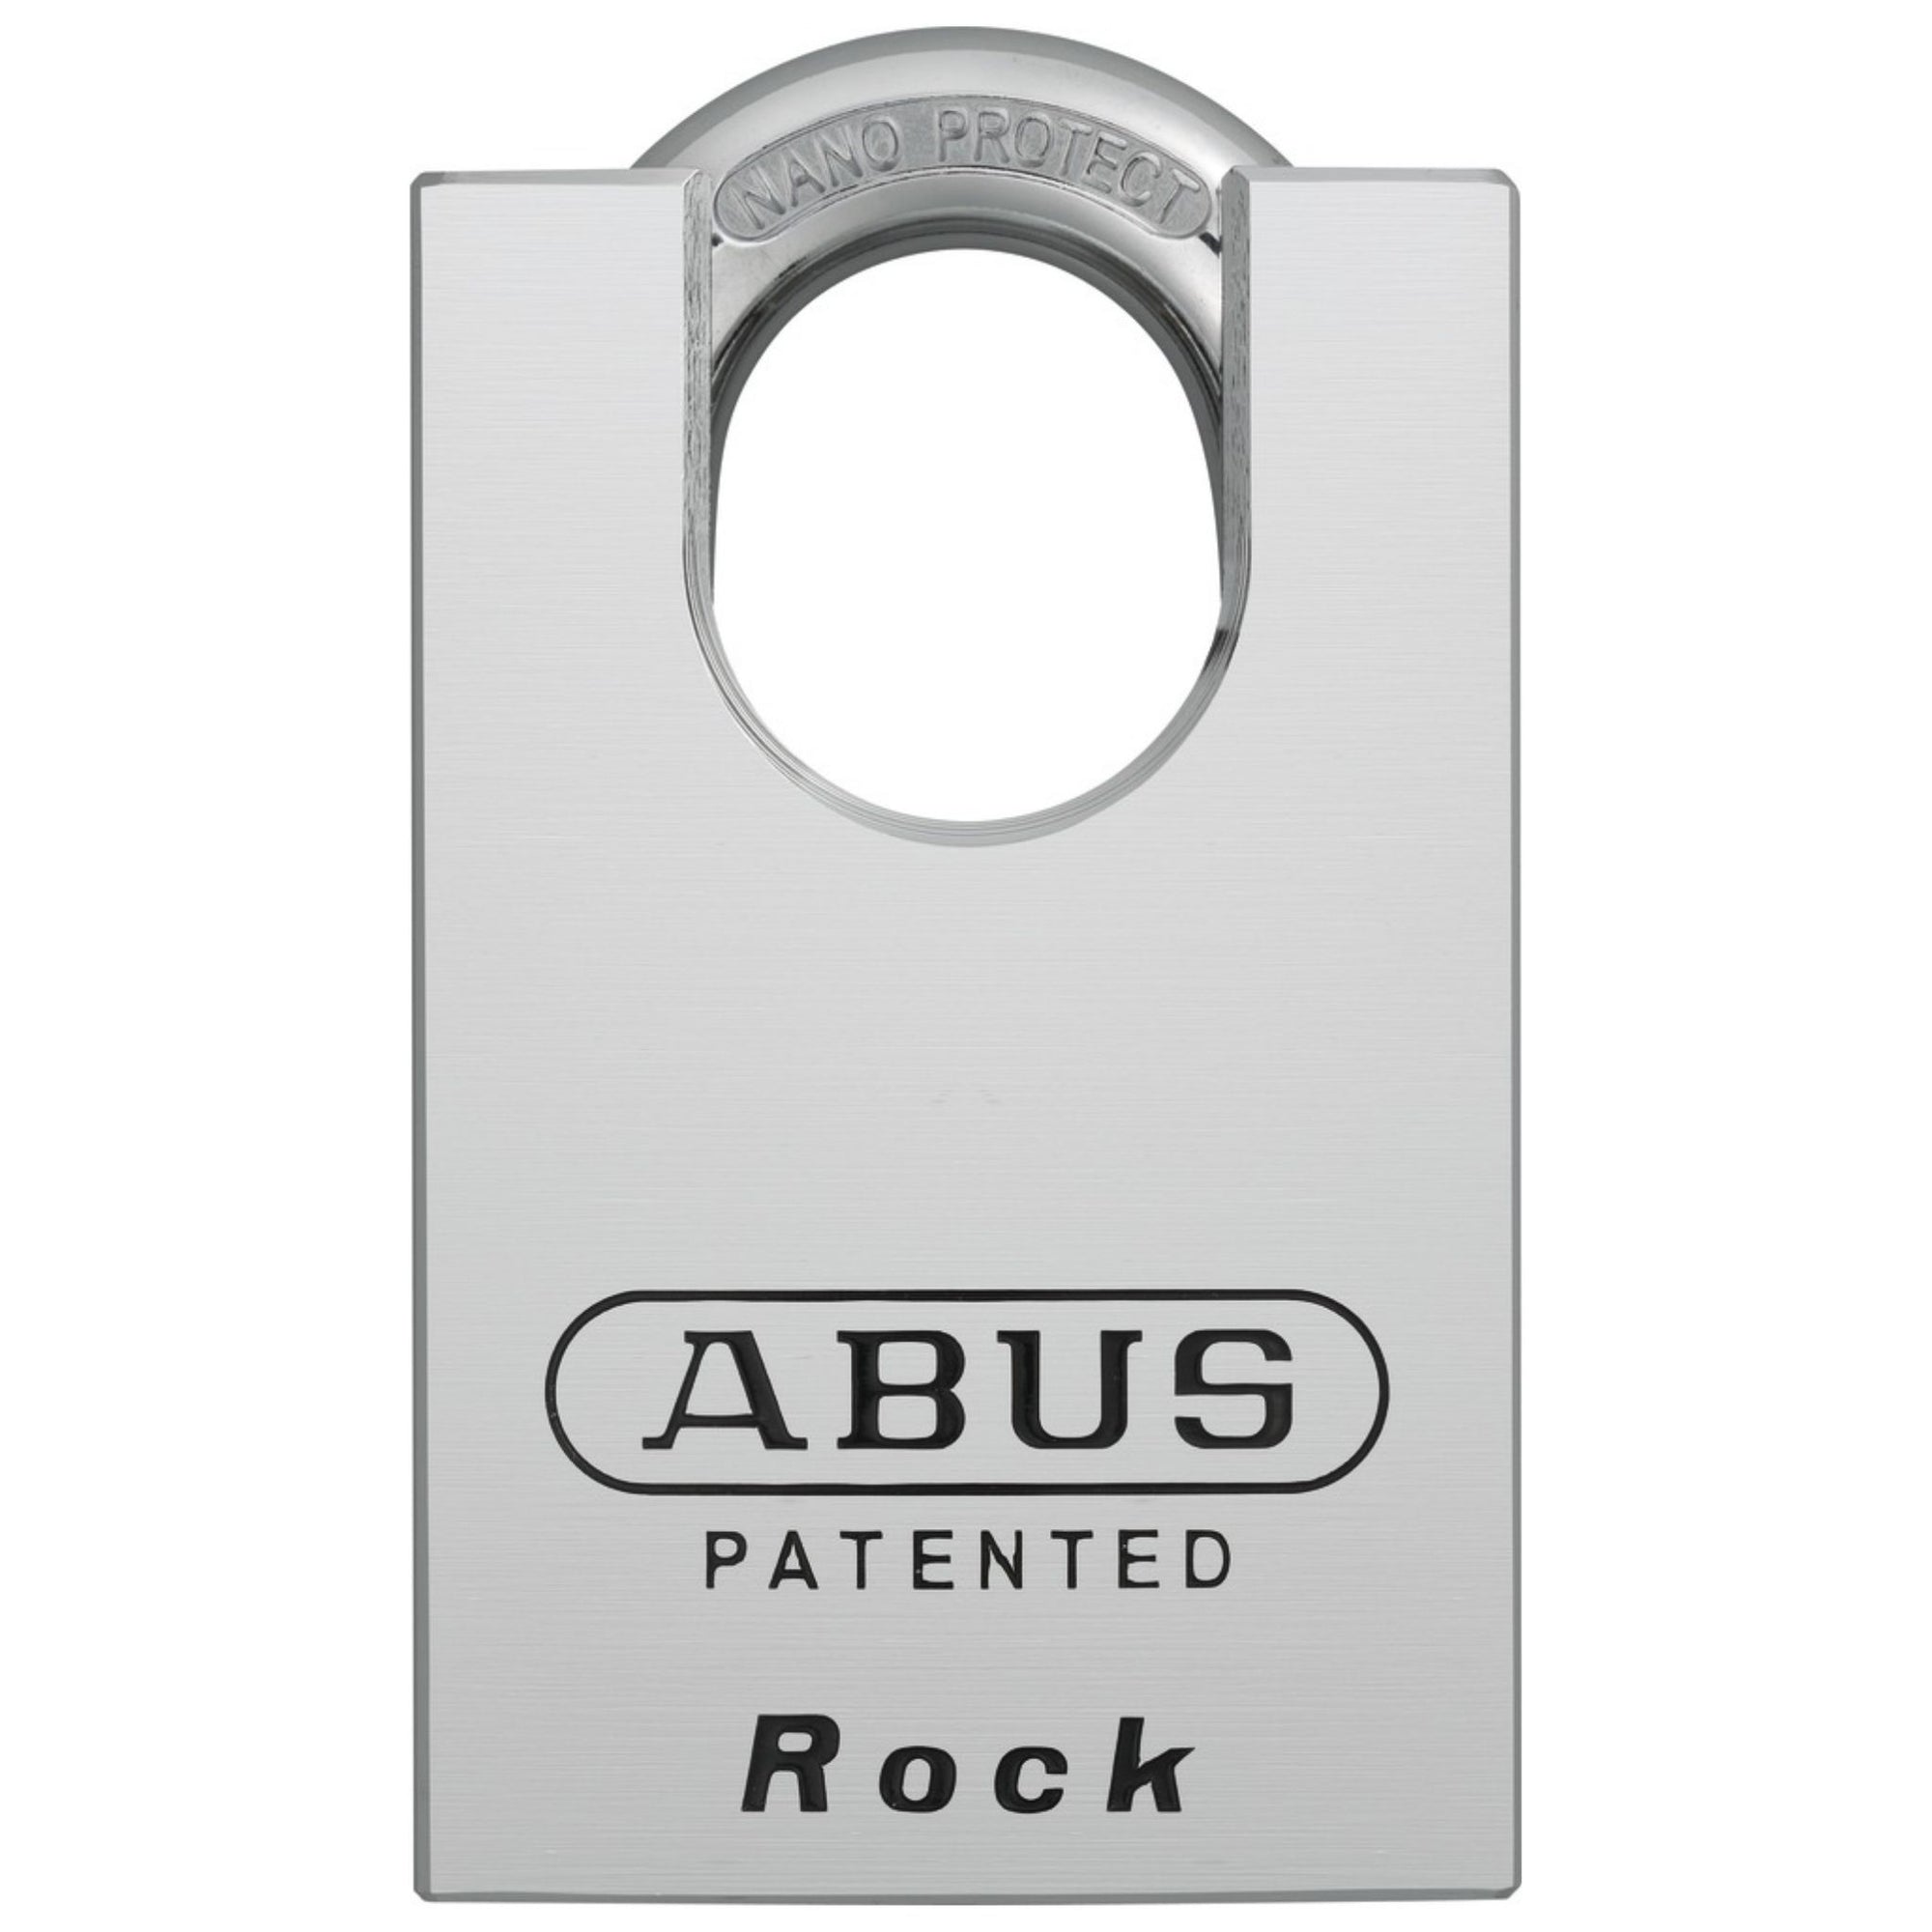 Abus 83CS/55 Rock Padlock Hardened Steel Locks with Shackle Guard Accept Many Popular OEM Cylinders - The Lock Source